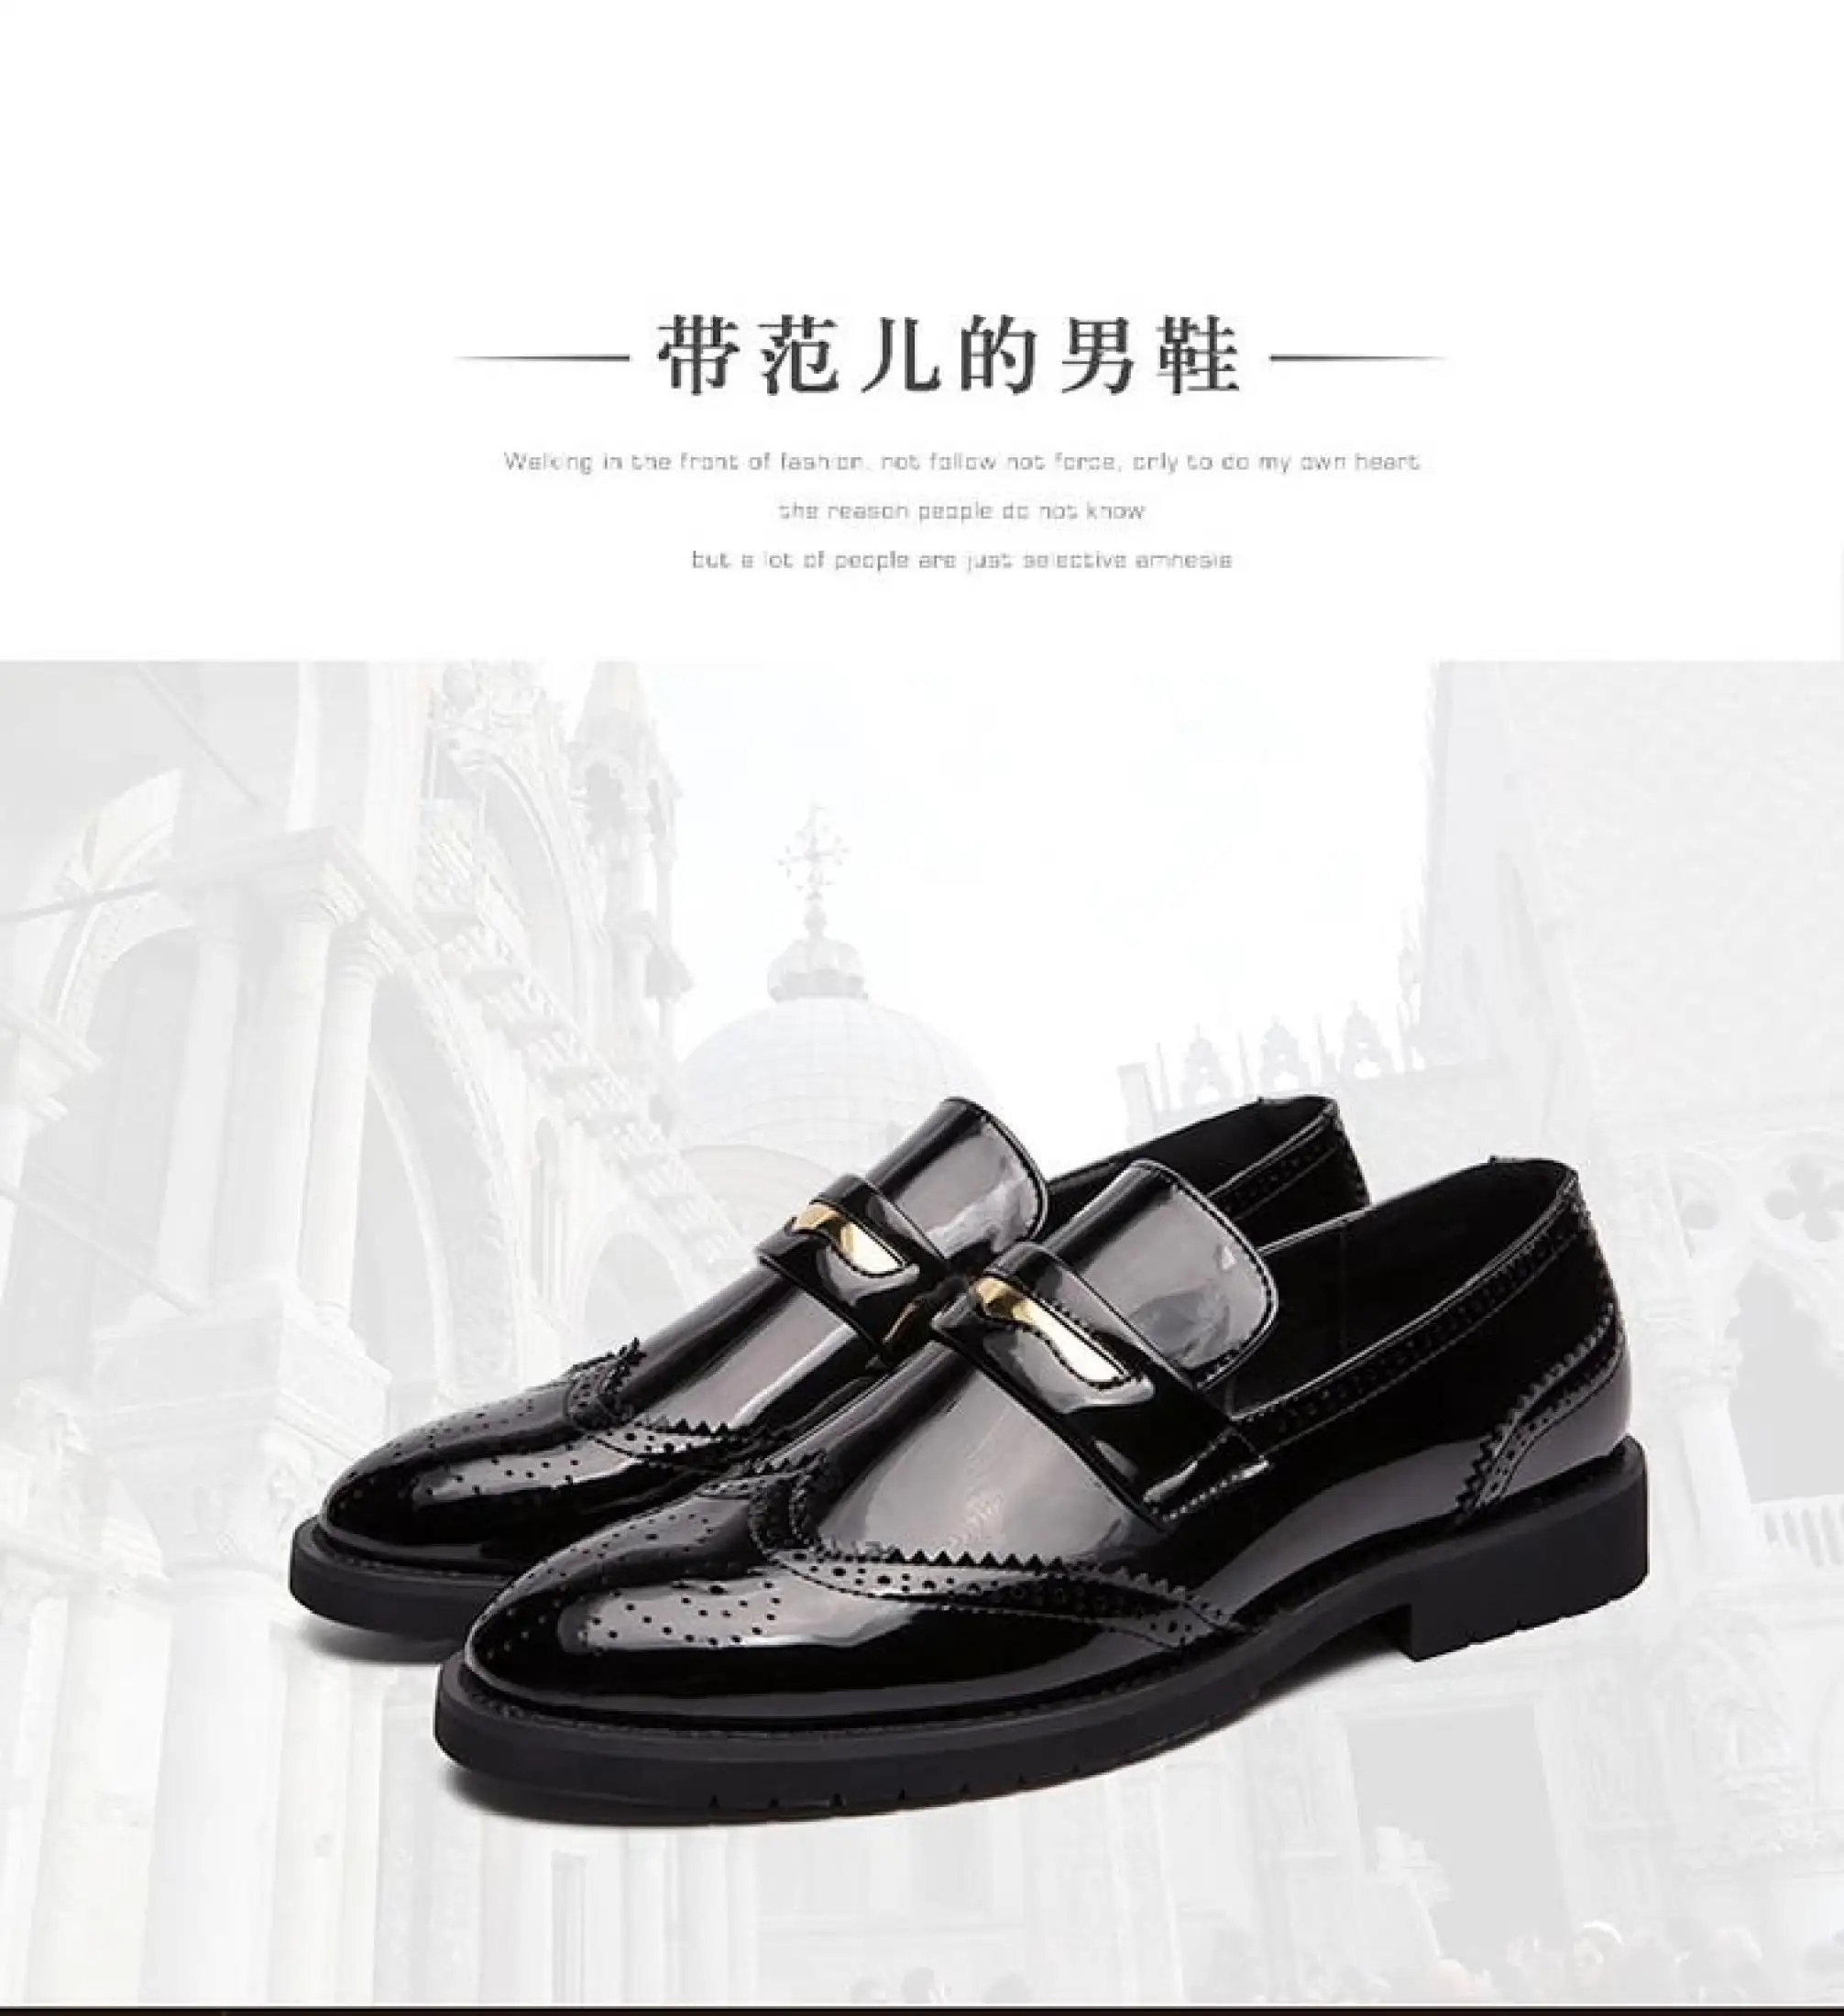 Close Shoes HandMade Shoes Women Shoes Oxford Free Shipping Flat Shoes Also Large Size Shoes Black /& White Leather Dress Shoes